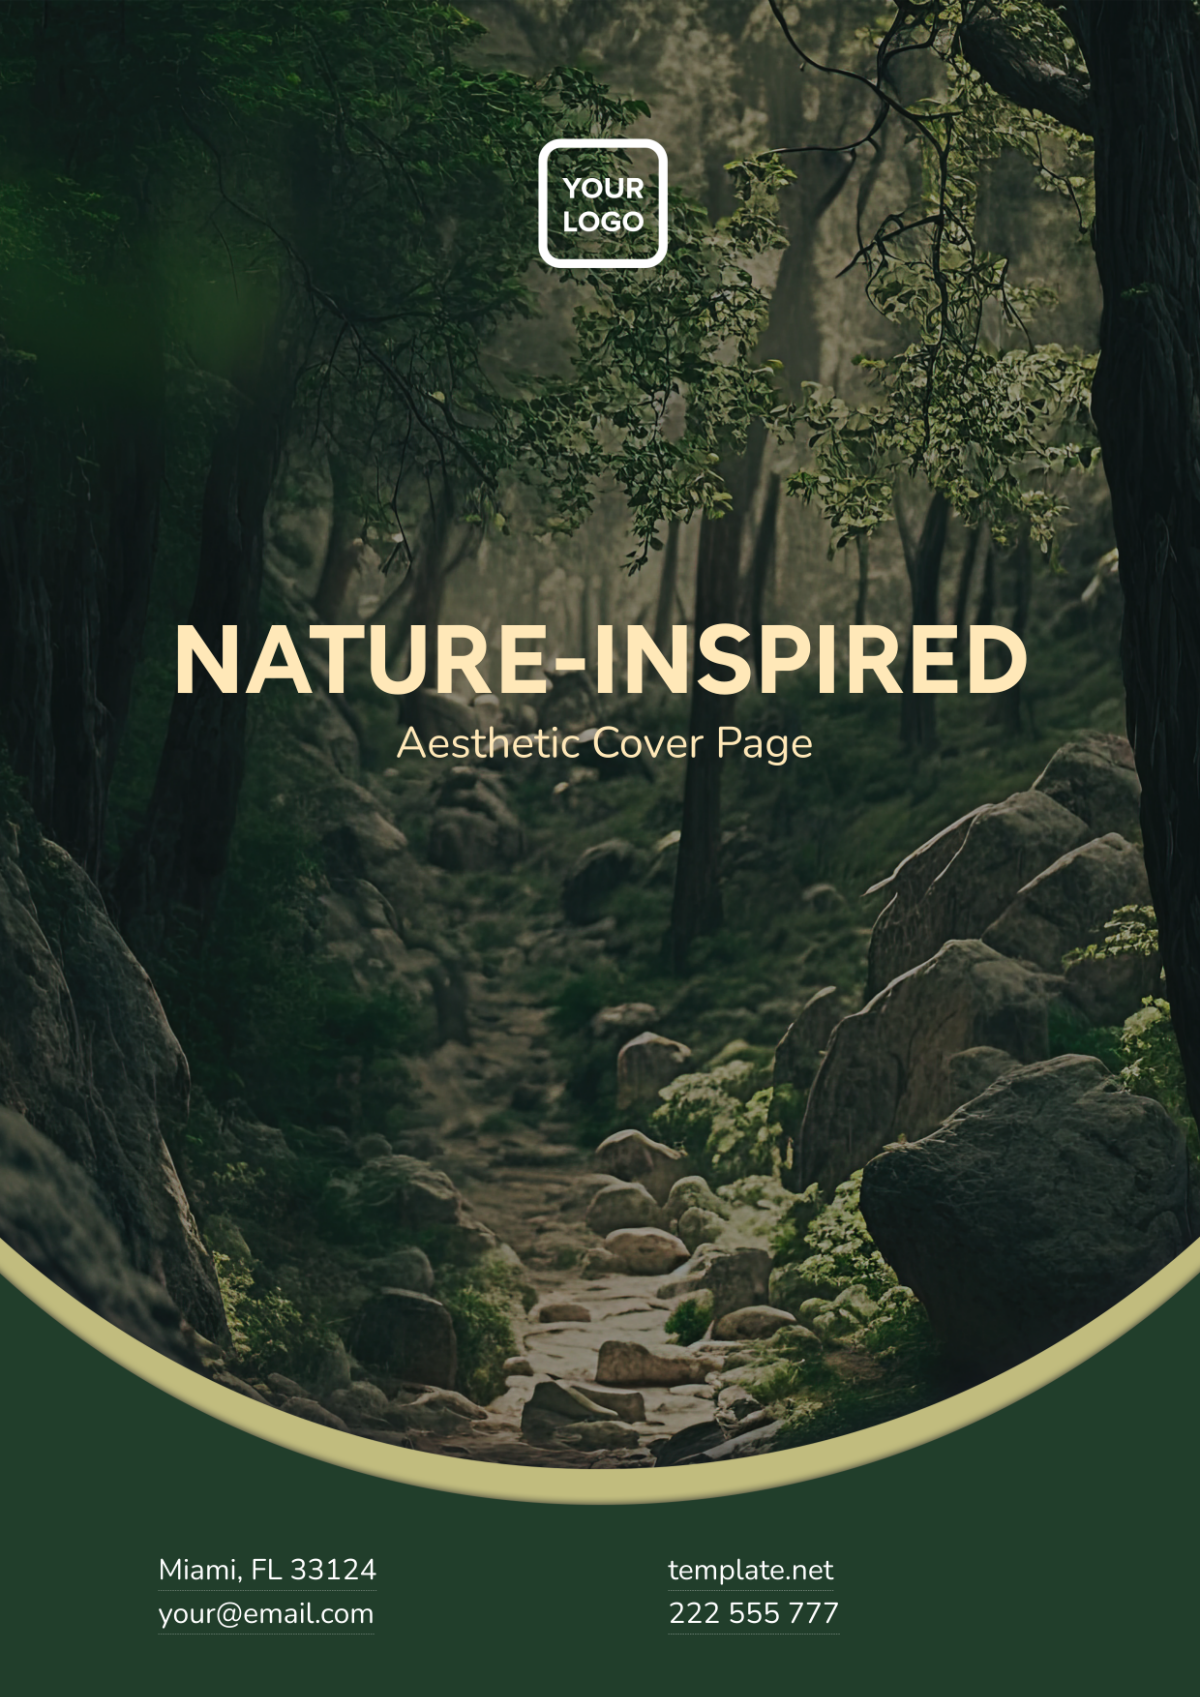 Nature-Inspired Aesthetic Cover Page Template